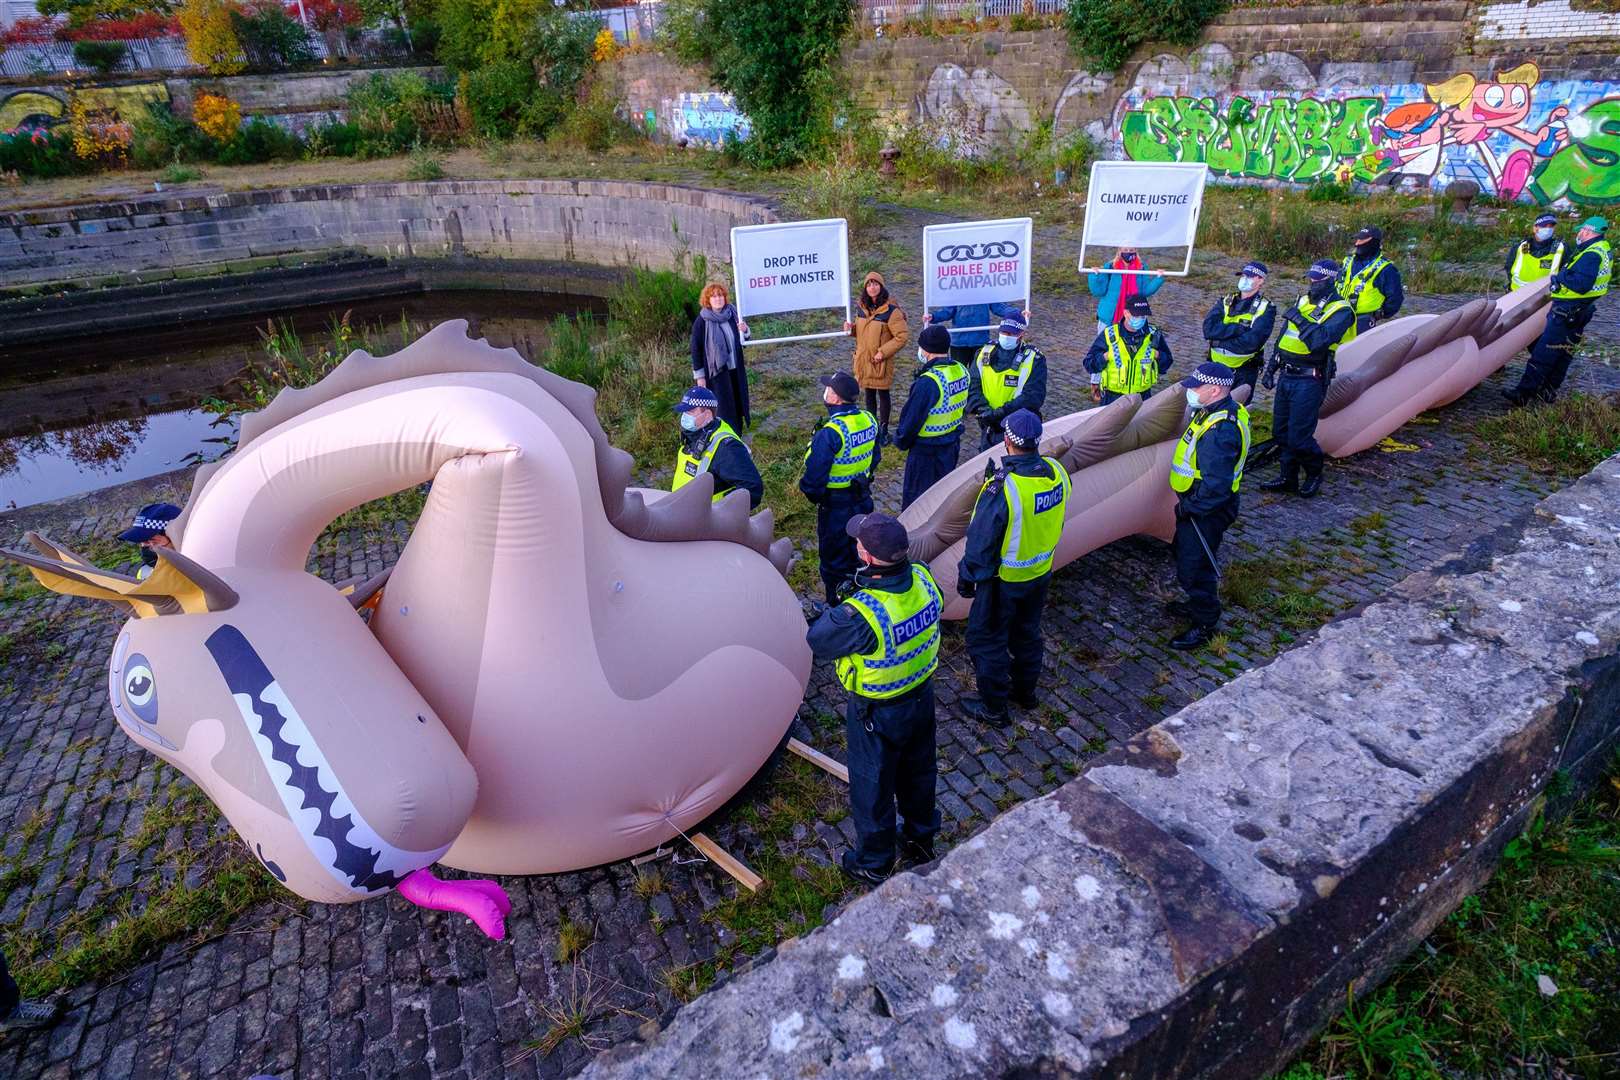 Nessie was siezed by police earlier today.